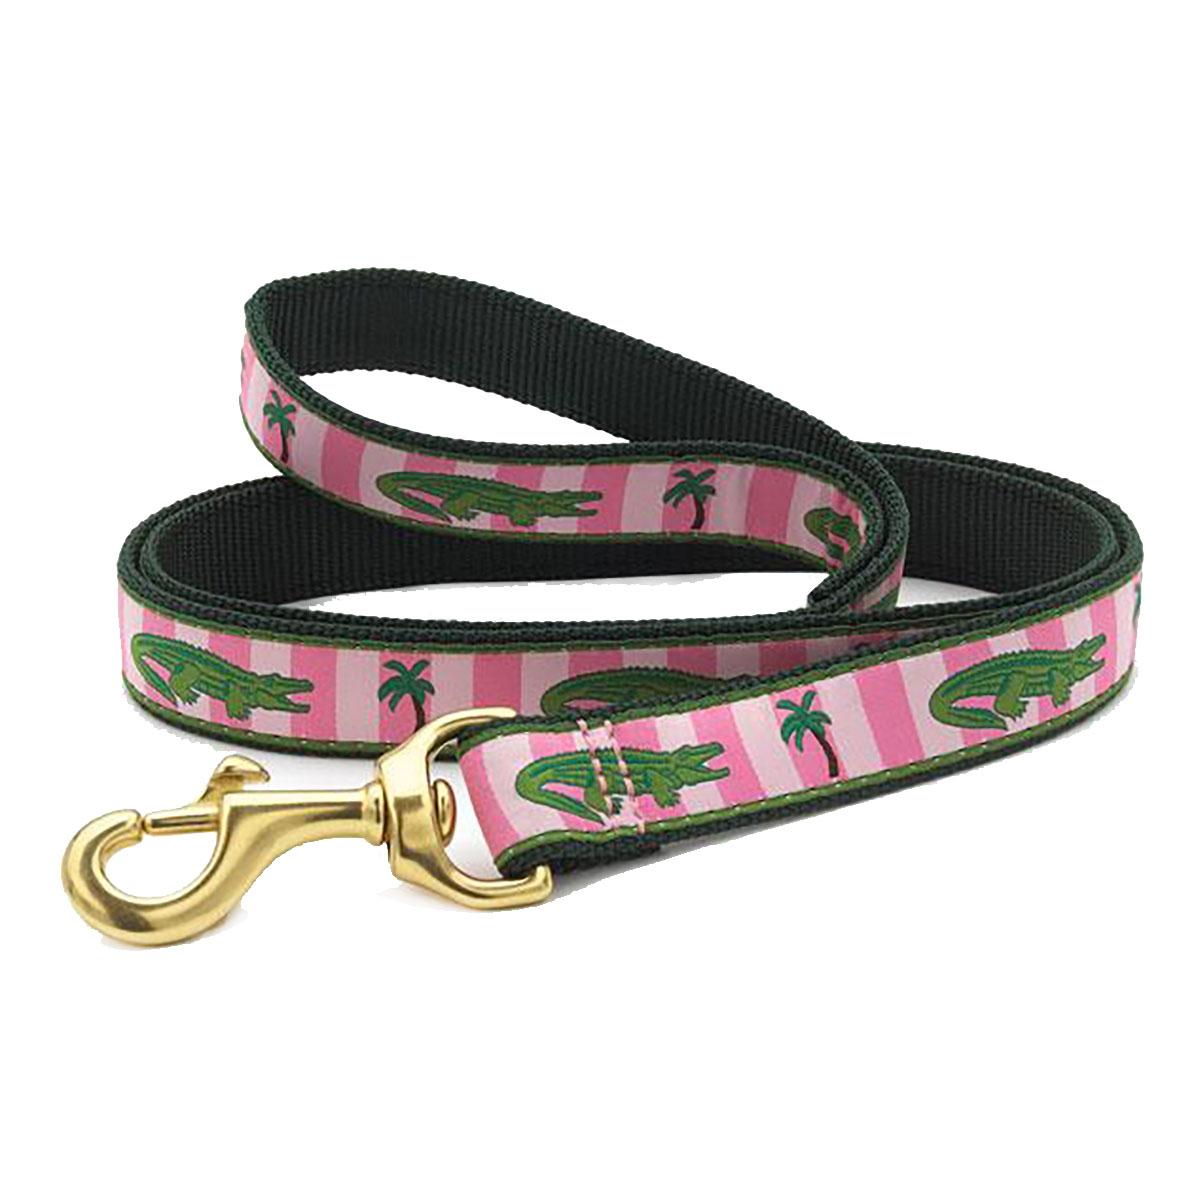 Alligator Dog Leash by Up Country